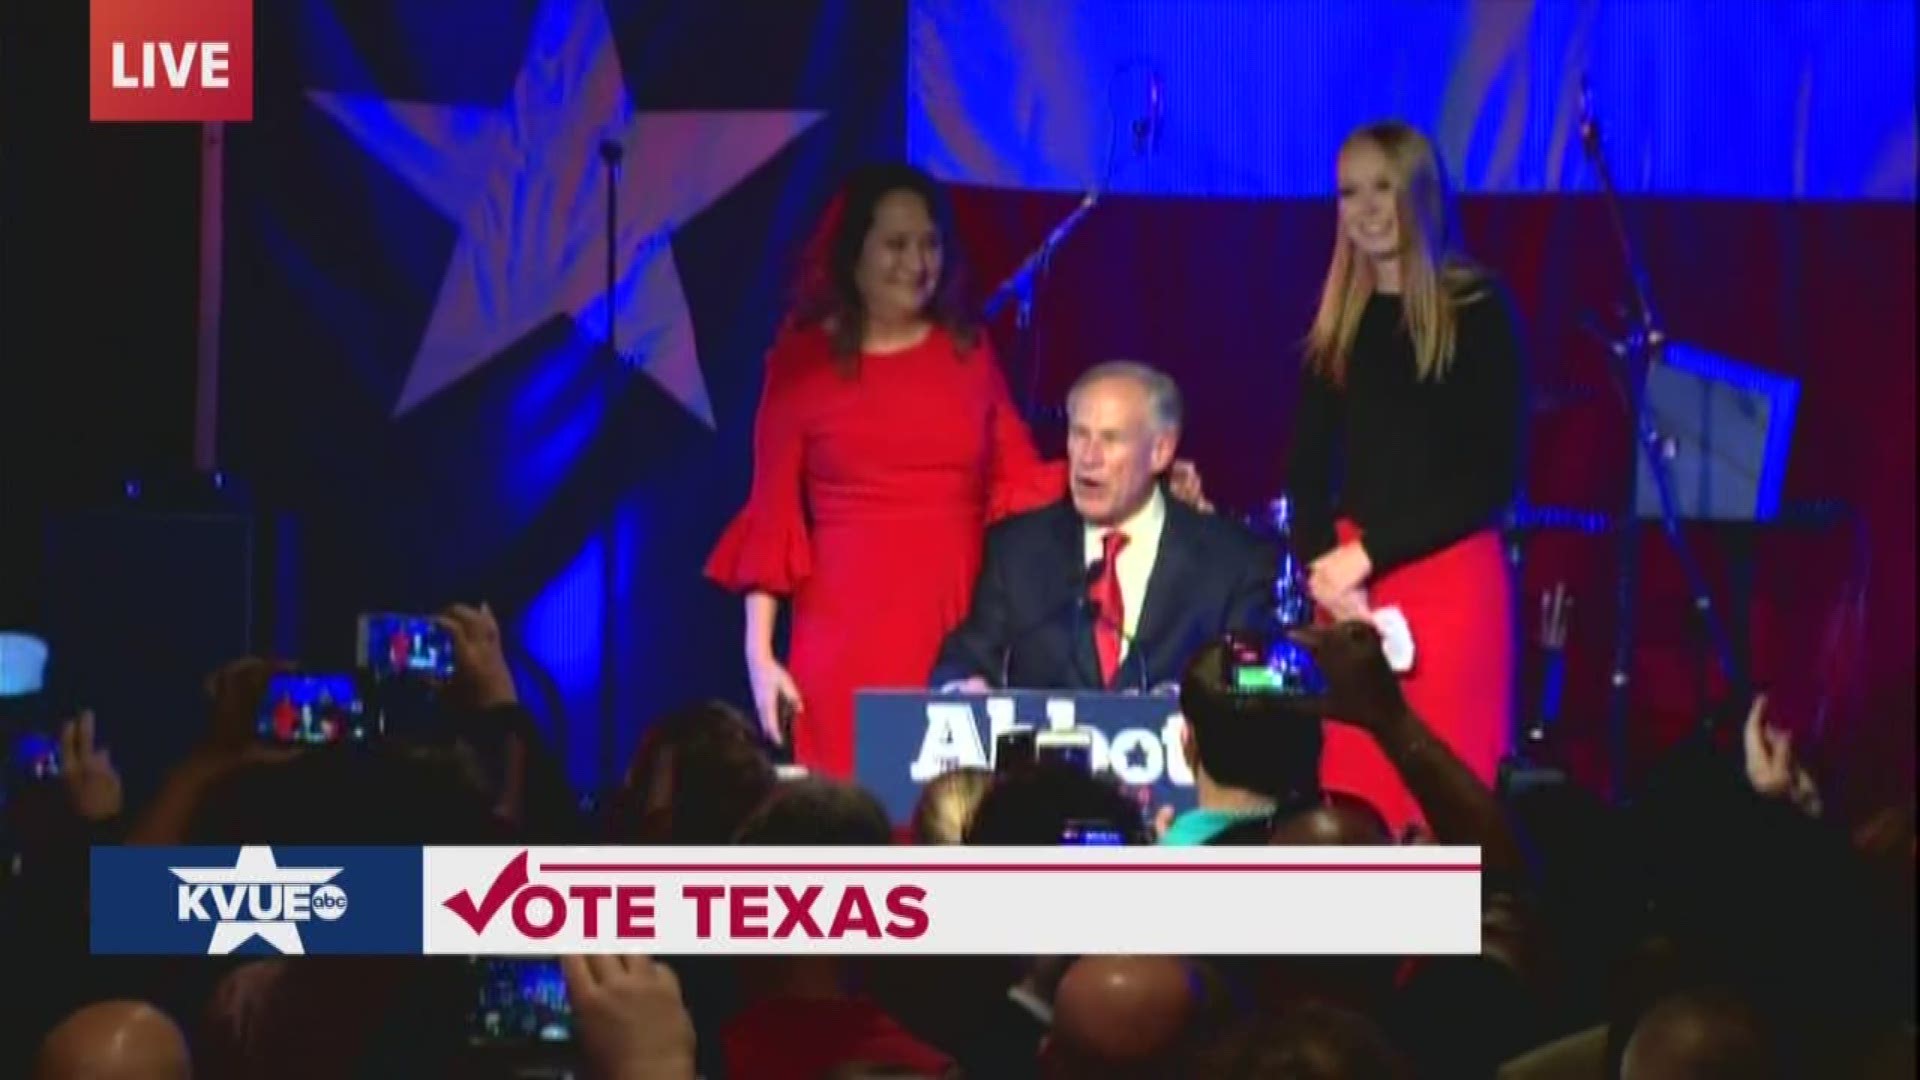 Texas Governor Greg Abbott was elected for a second term during the 2018 mid-term election.